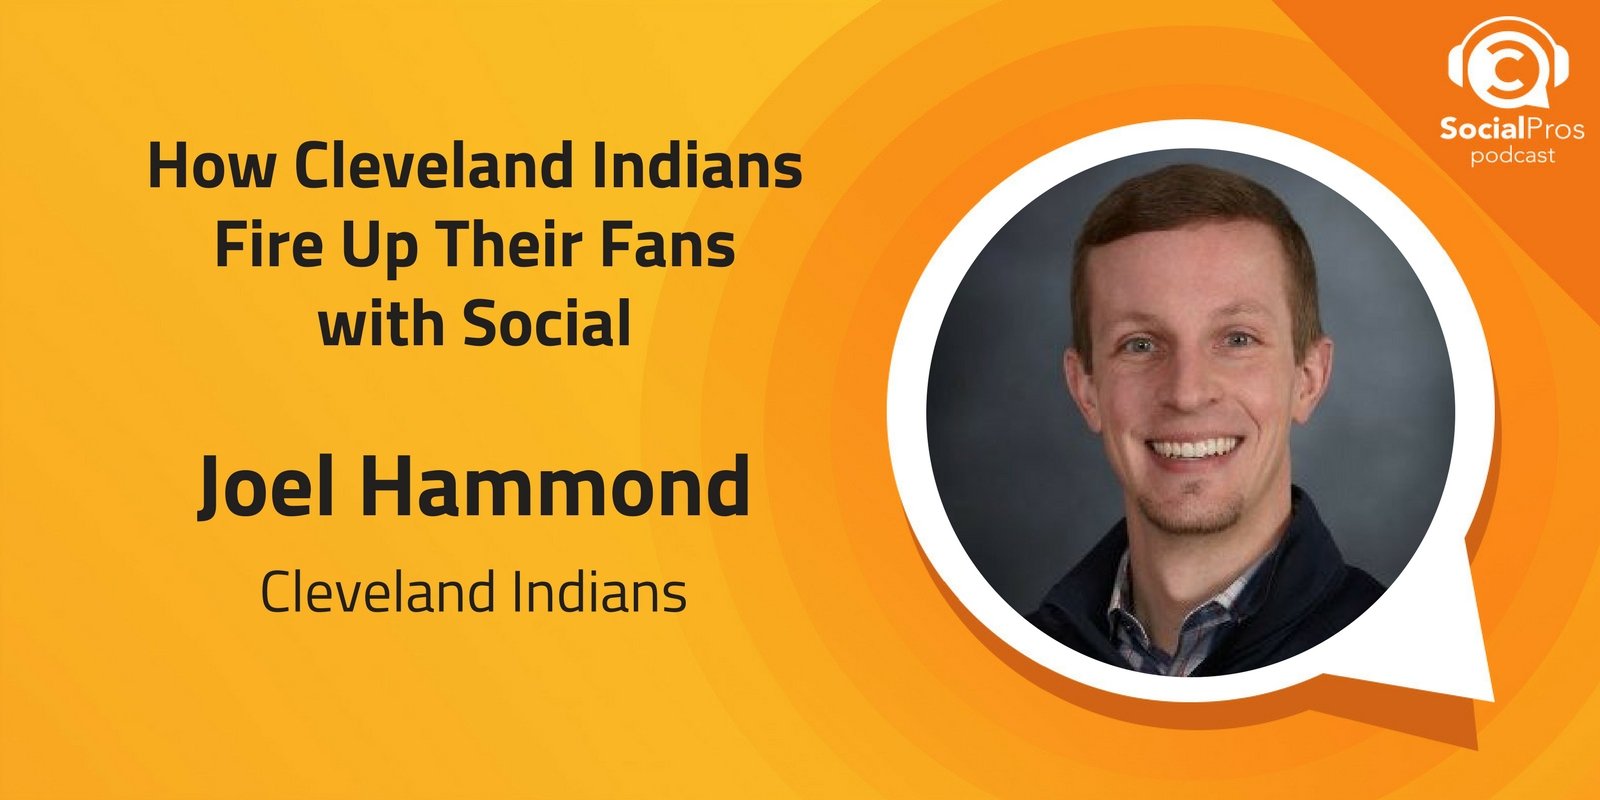 How Cleveland Indians Fire Up Their Fans with Social